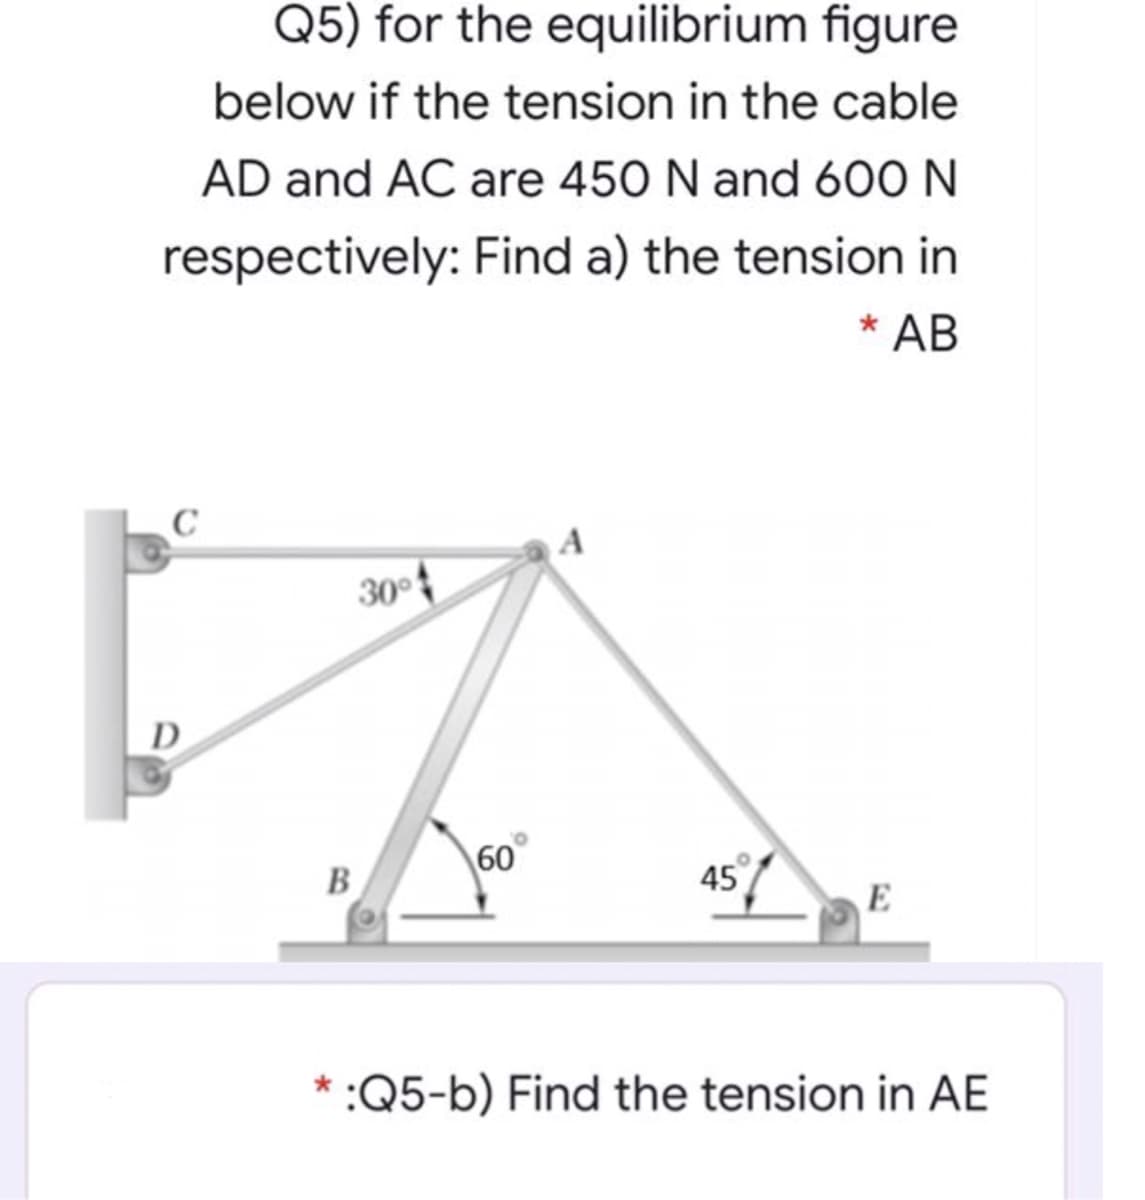 Q5) for the equilibrium figure
below if the tension in the cable
AD and AC are 450 N and 600 N
respectively: Find a) the tension in
* AB
A
30°
D
60
45
B
E
* :Q5-b) Find the tension in AE
